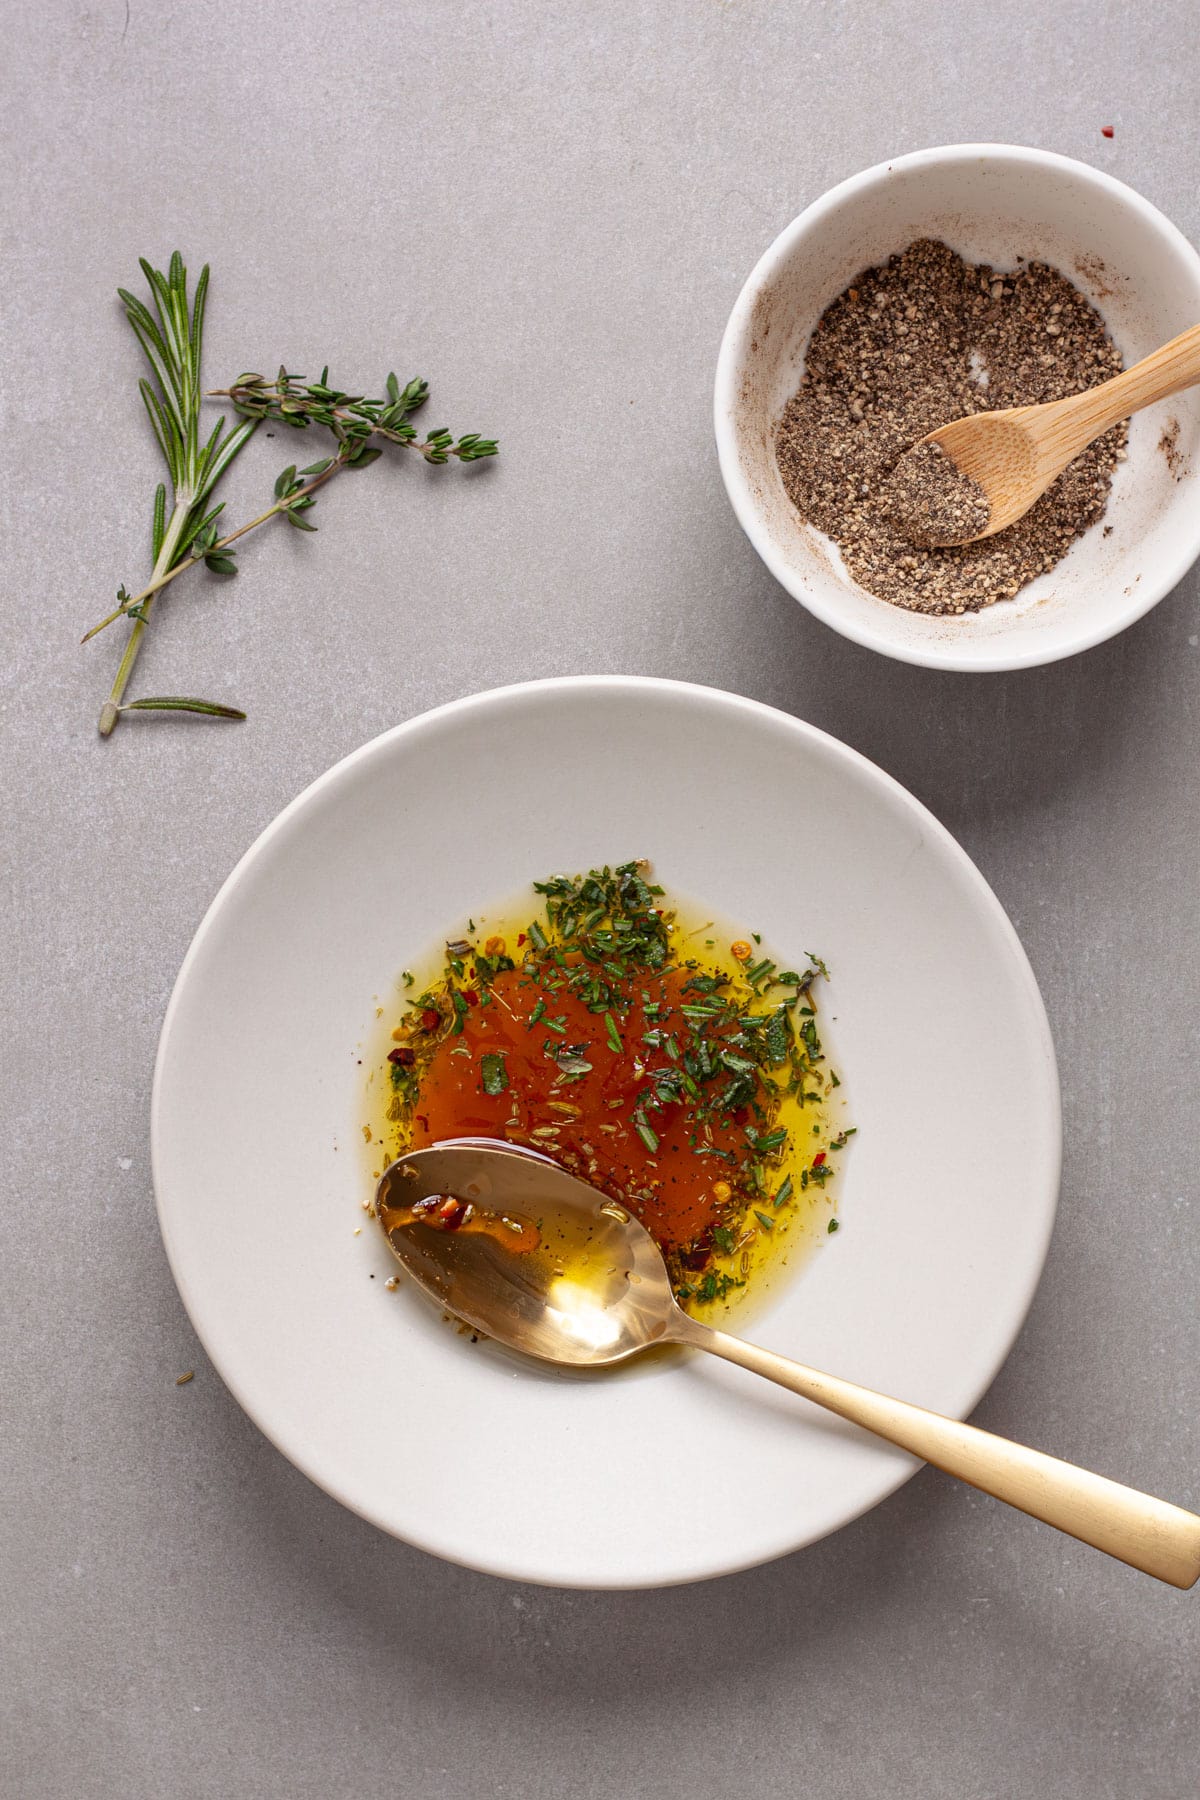 A small bowl with honey, oil, herbs and crushed red pepper flakes on a gray table.